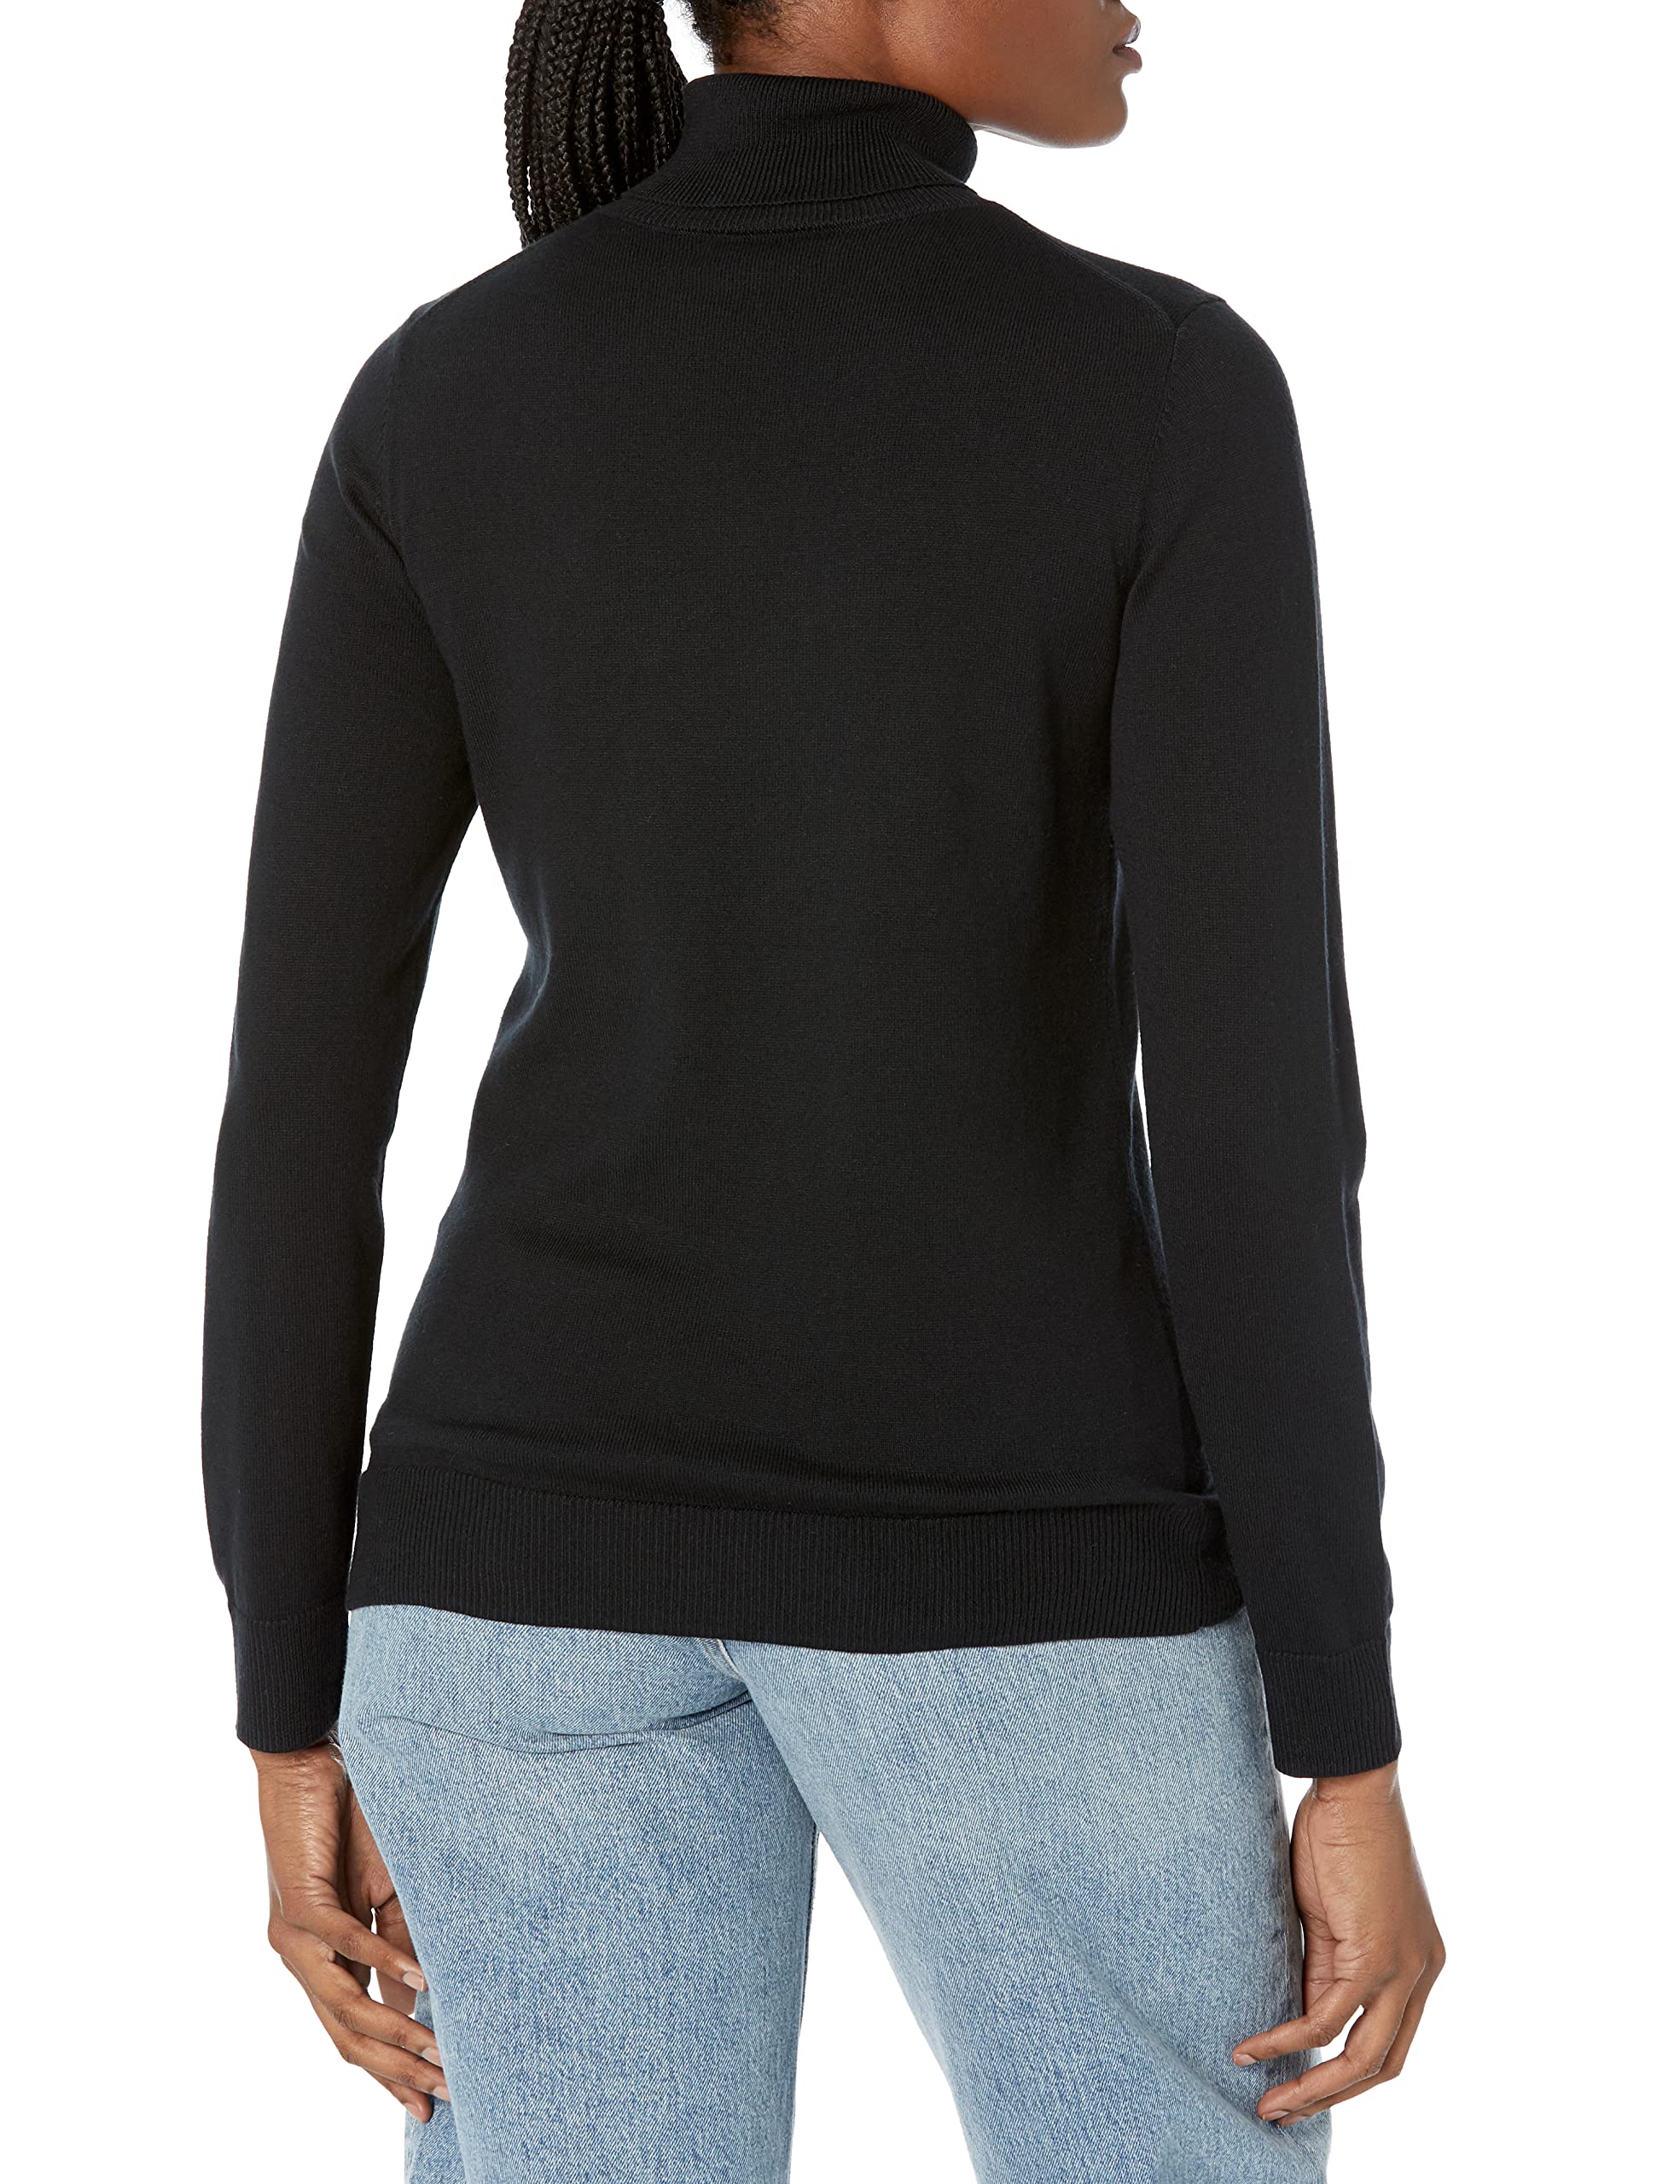 Amazon Essentials Women's Classic-Fit Lightweight Long-Sleeve Turtleneck Sweater (Available in Plus Size)